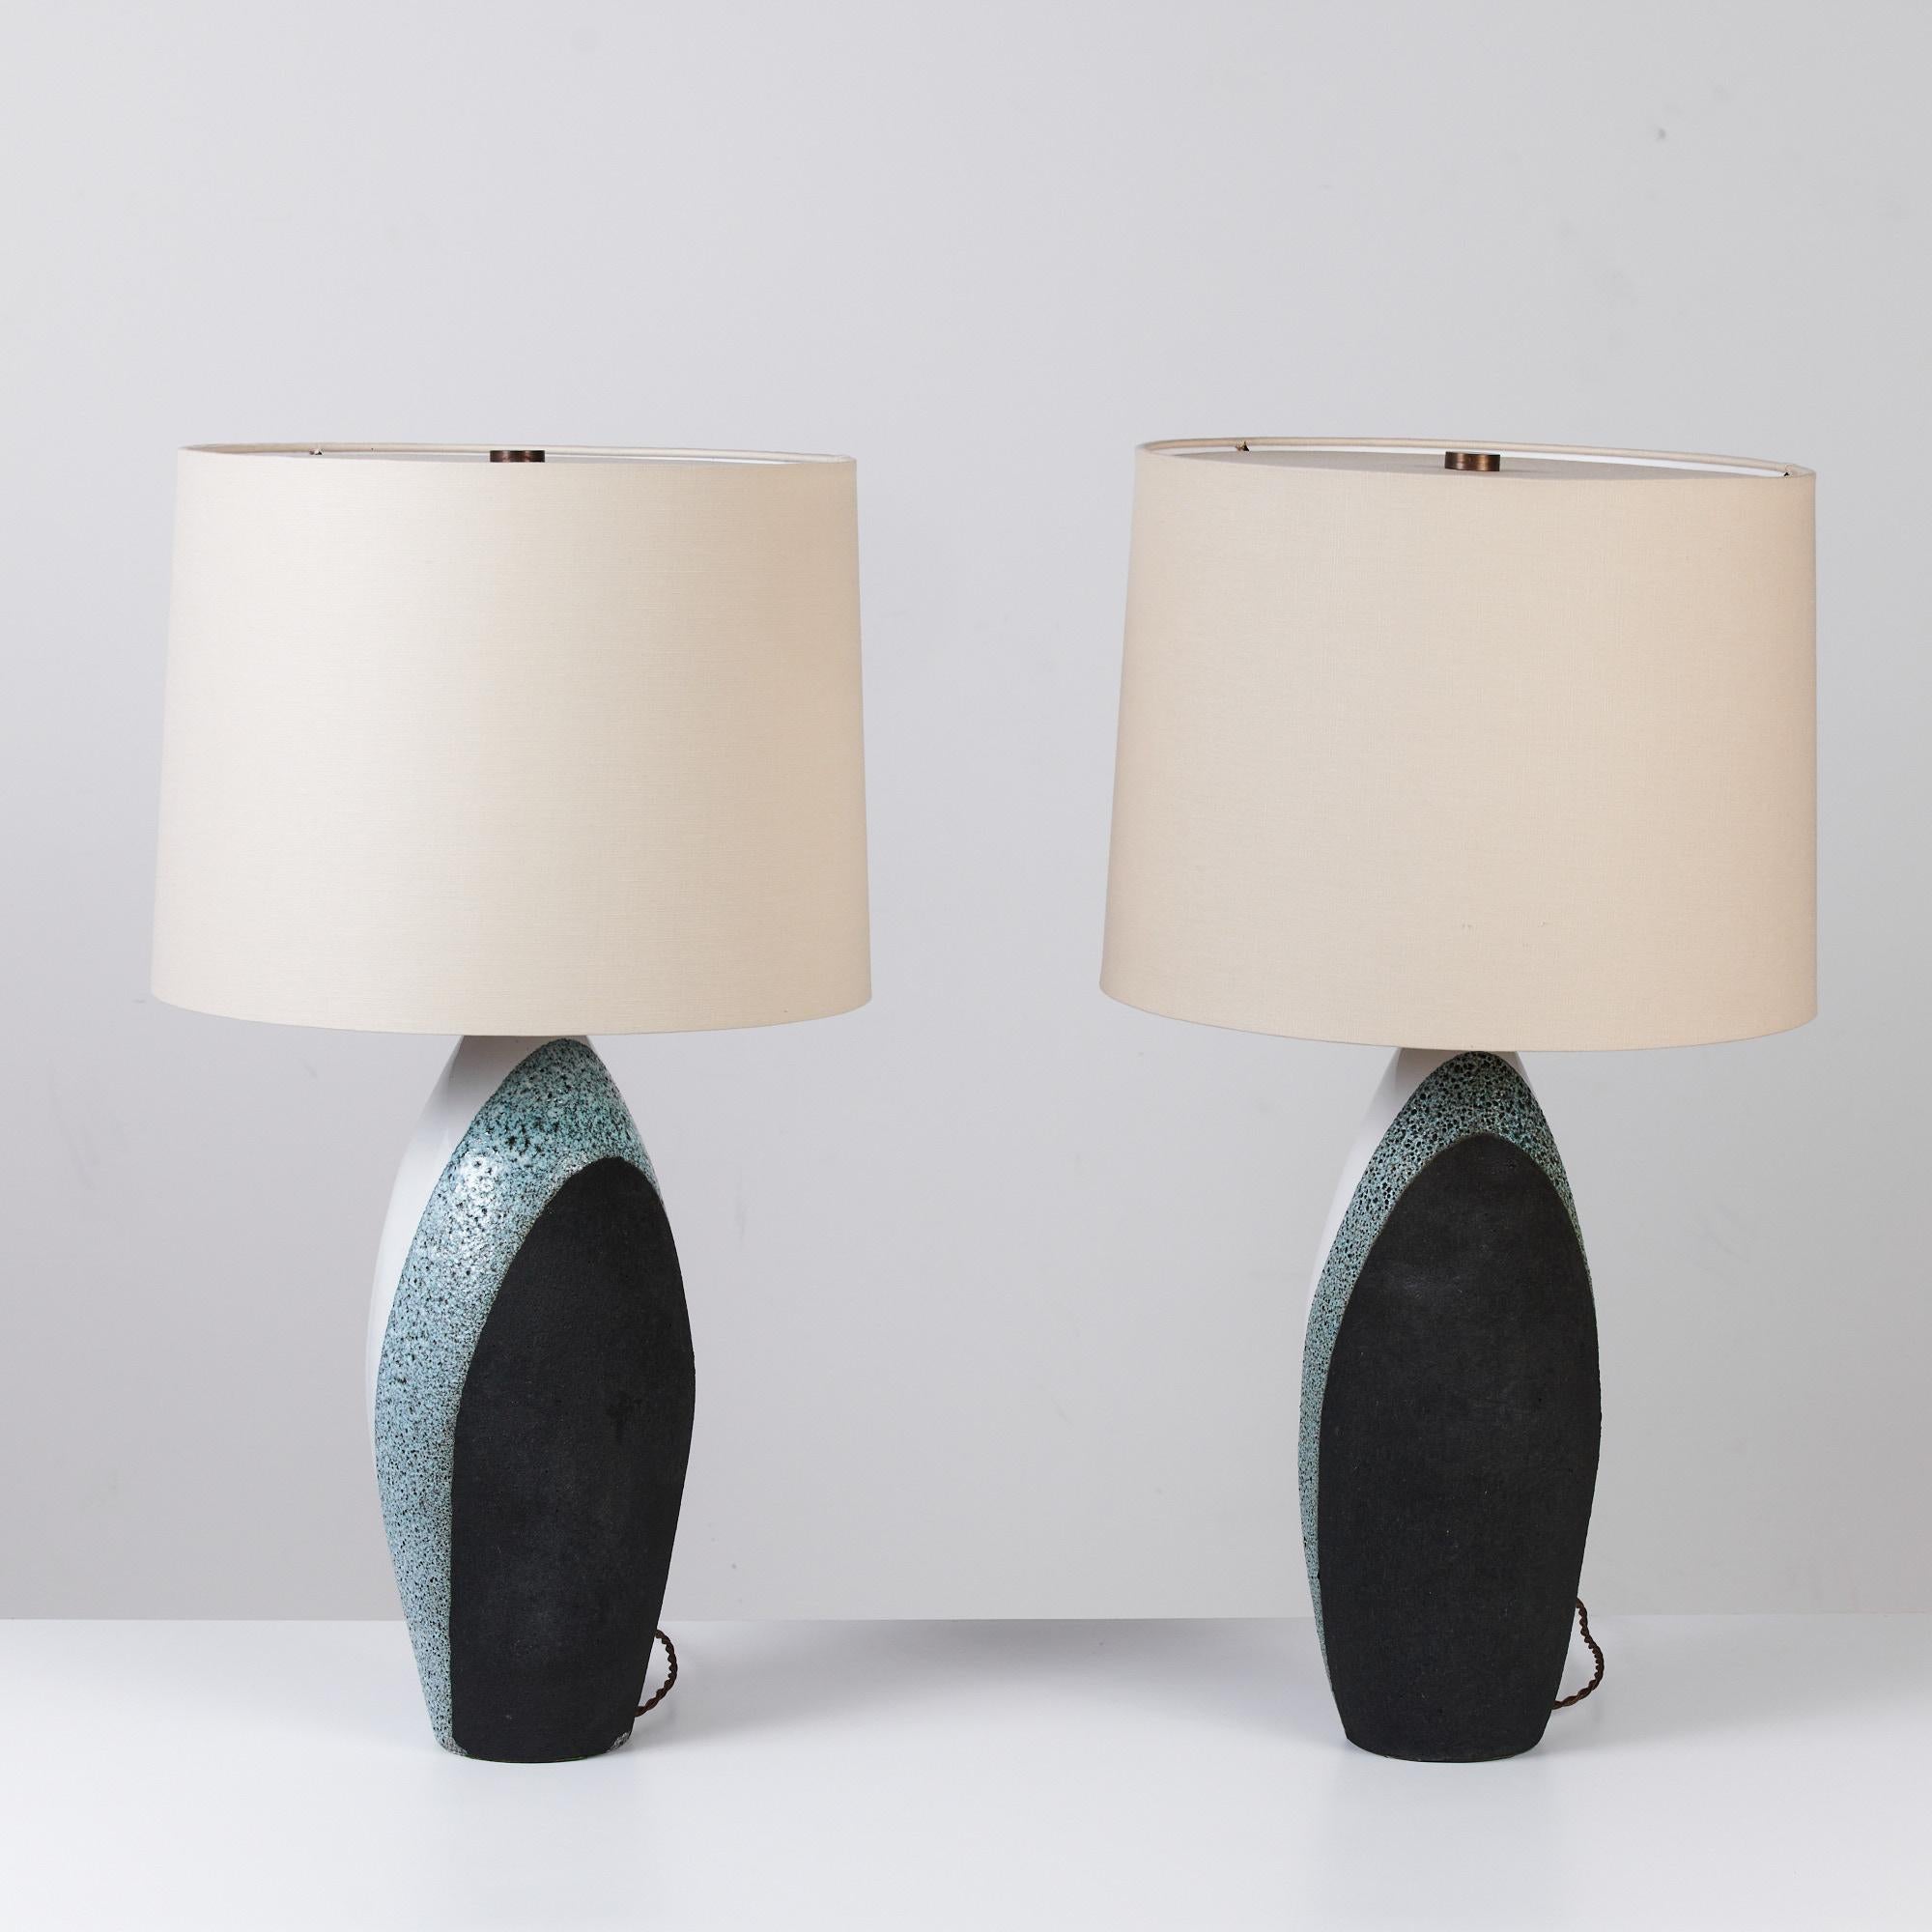 Brass Pair of Ettore Sottsass for Bitossi Glazed Ceramic Lamps For Sale